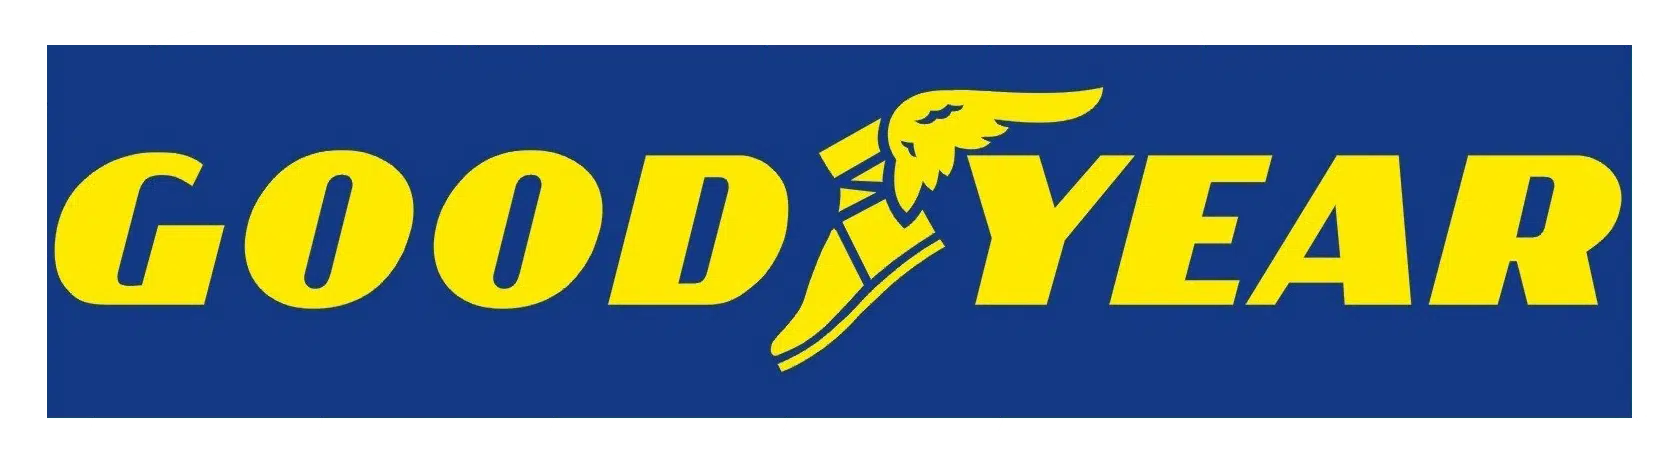 goodyear.png (1)